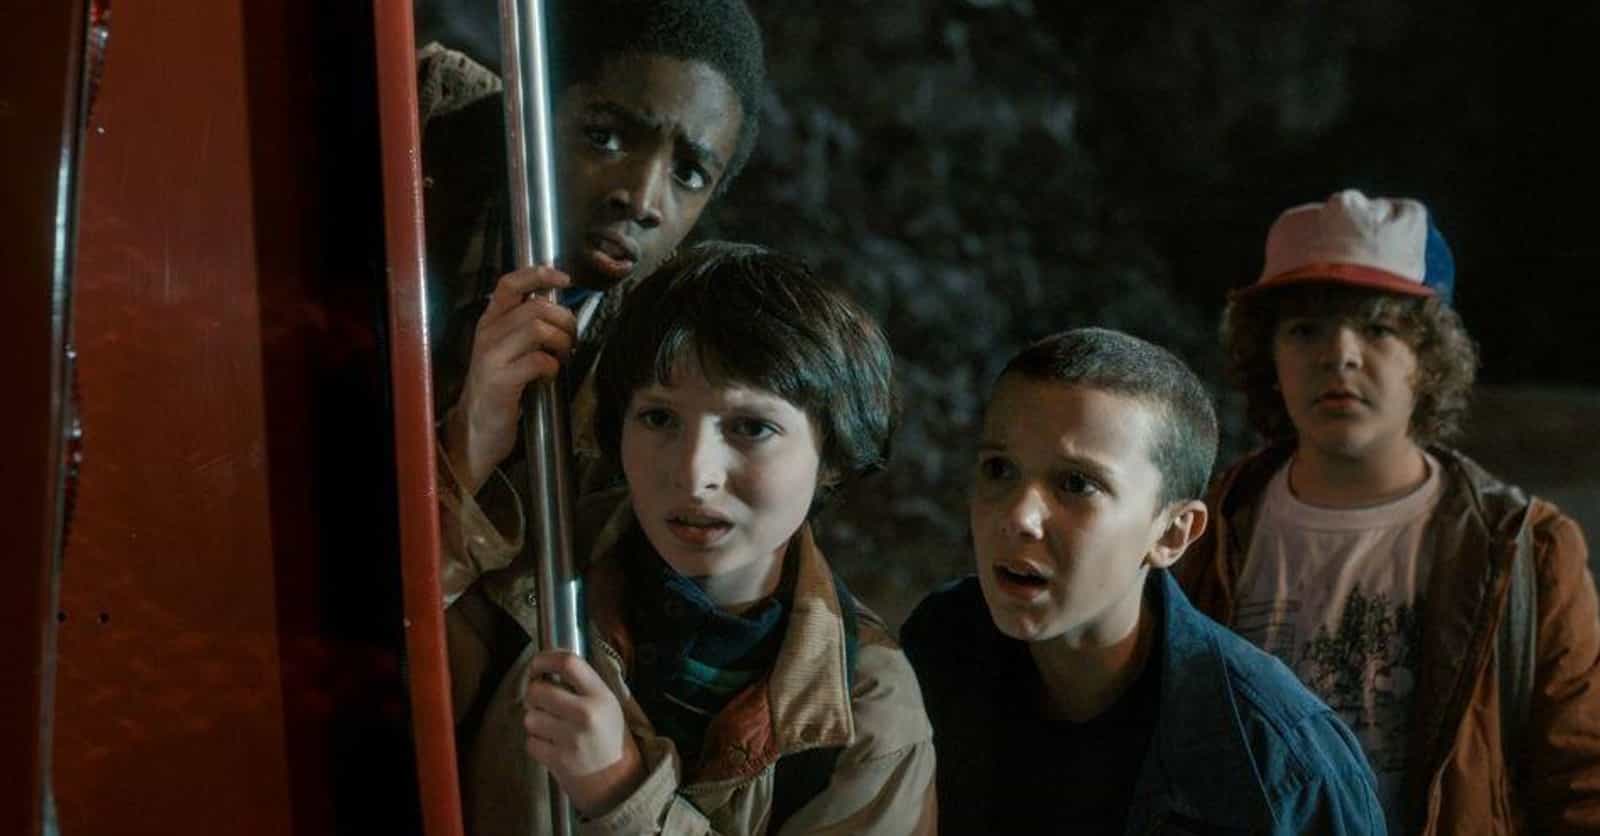 Behind The Scenes Secrets From The Set Of 'Stranger Things'